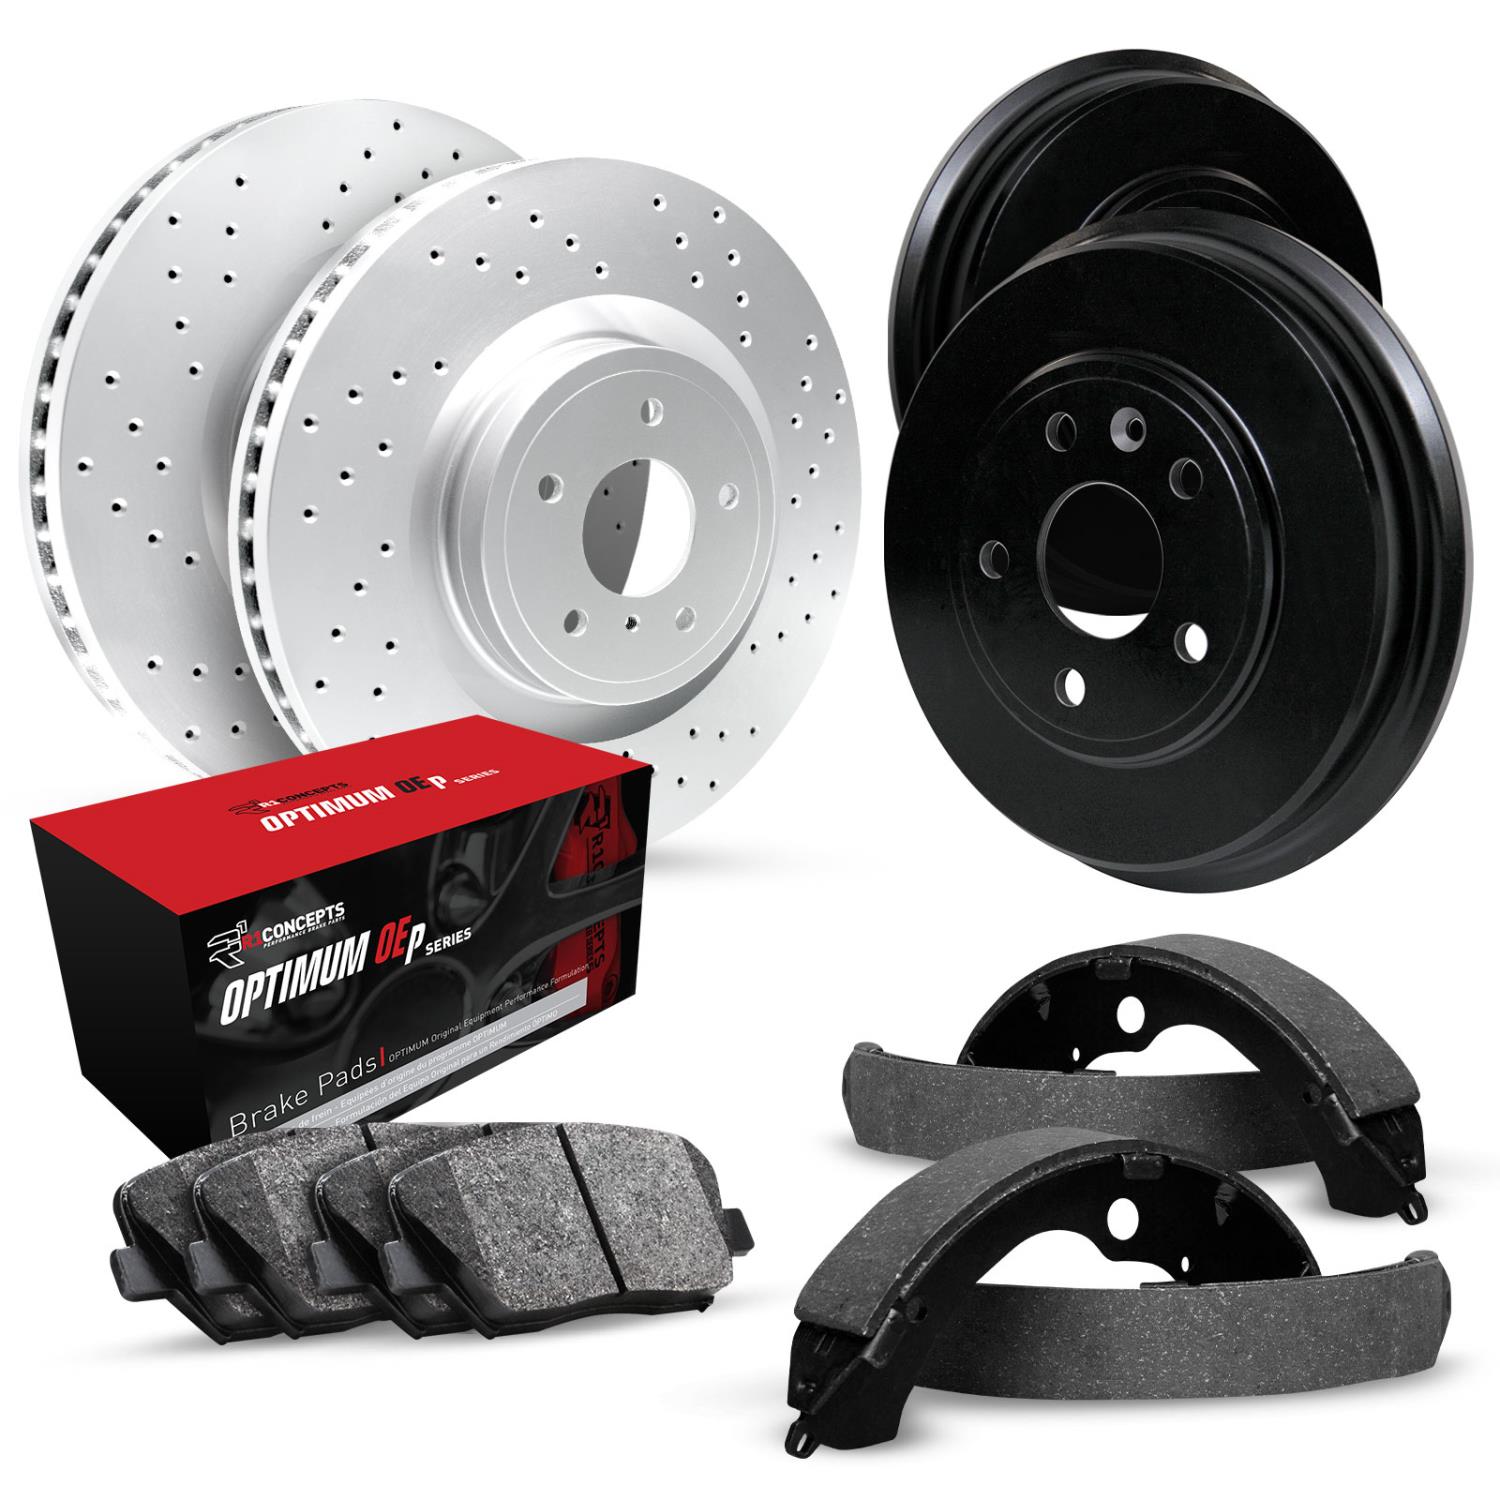 GEO-Carbon Drilled Brake Rotor & Drum Set w/Optimum OE Pads & Shoes, 2004-2008 GM, Position: Front & Rear